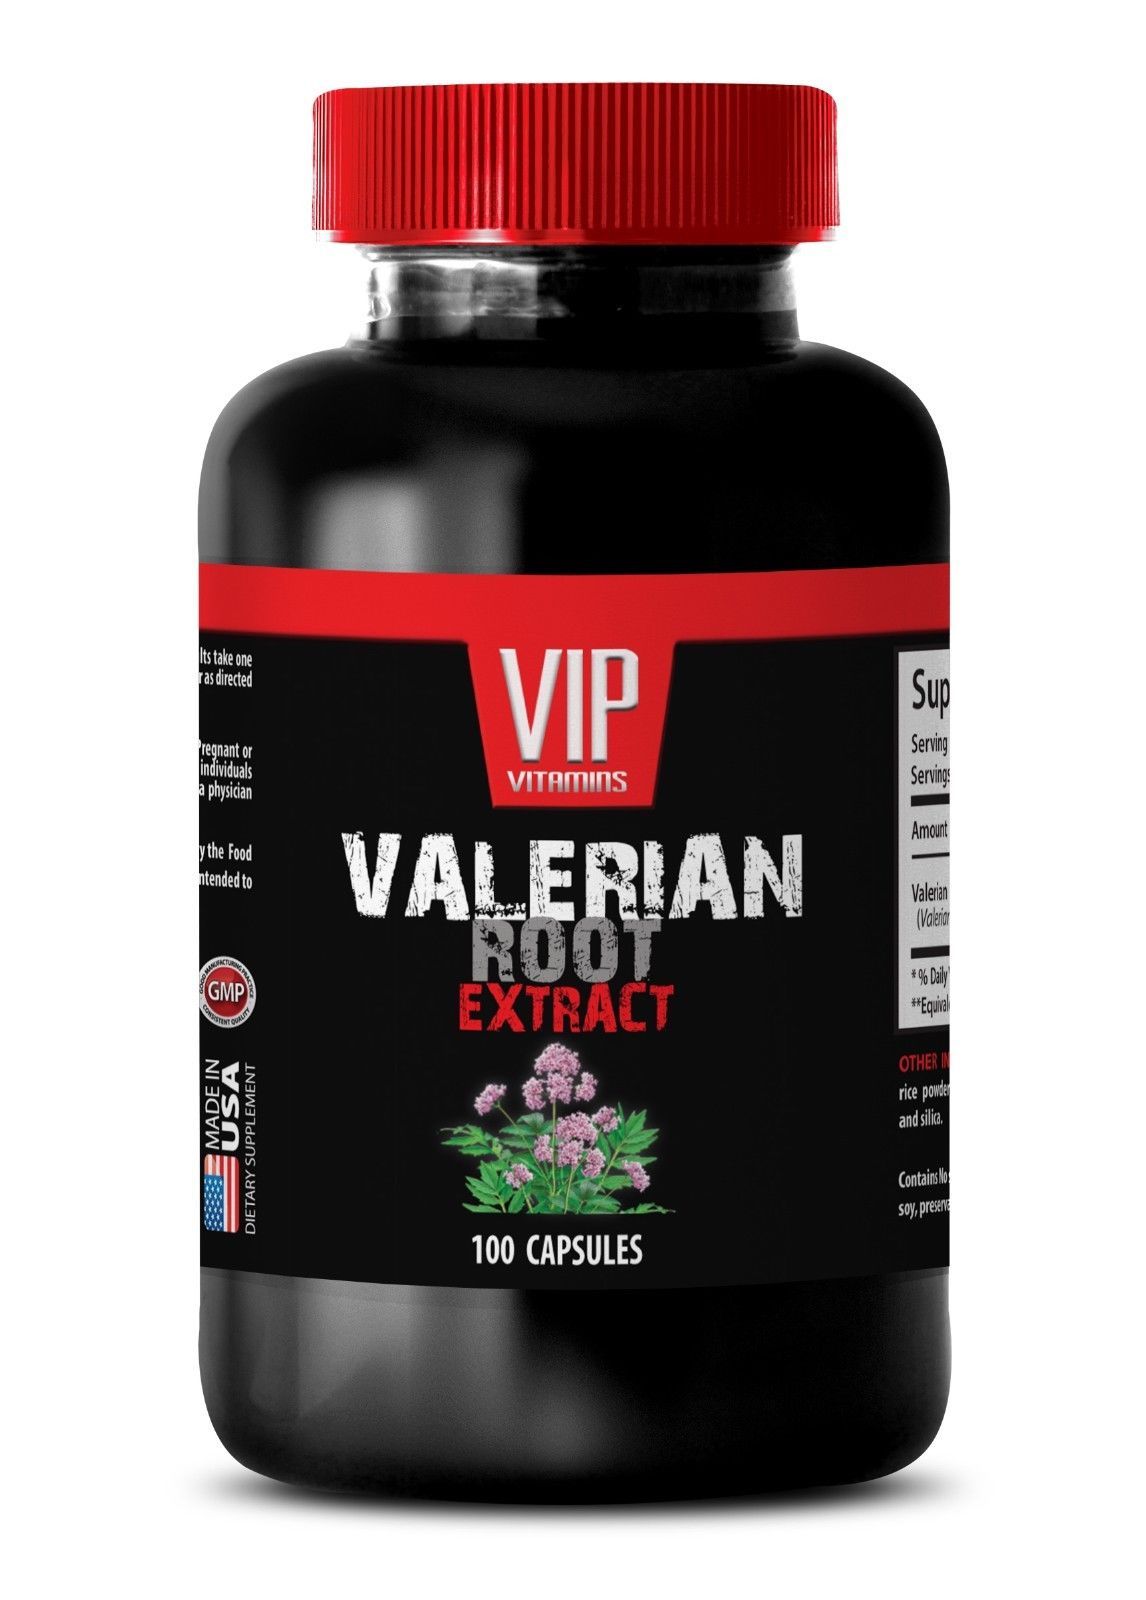 Valerian Dried - VALERIAN ROOT EXTRACT - can actually help with insomnia - 1B - $13.06